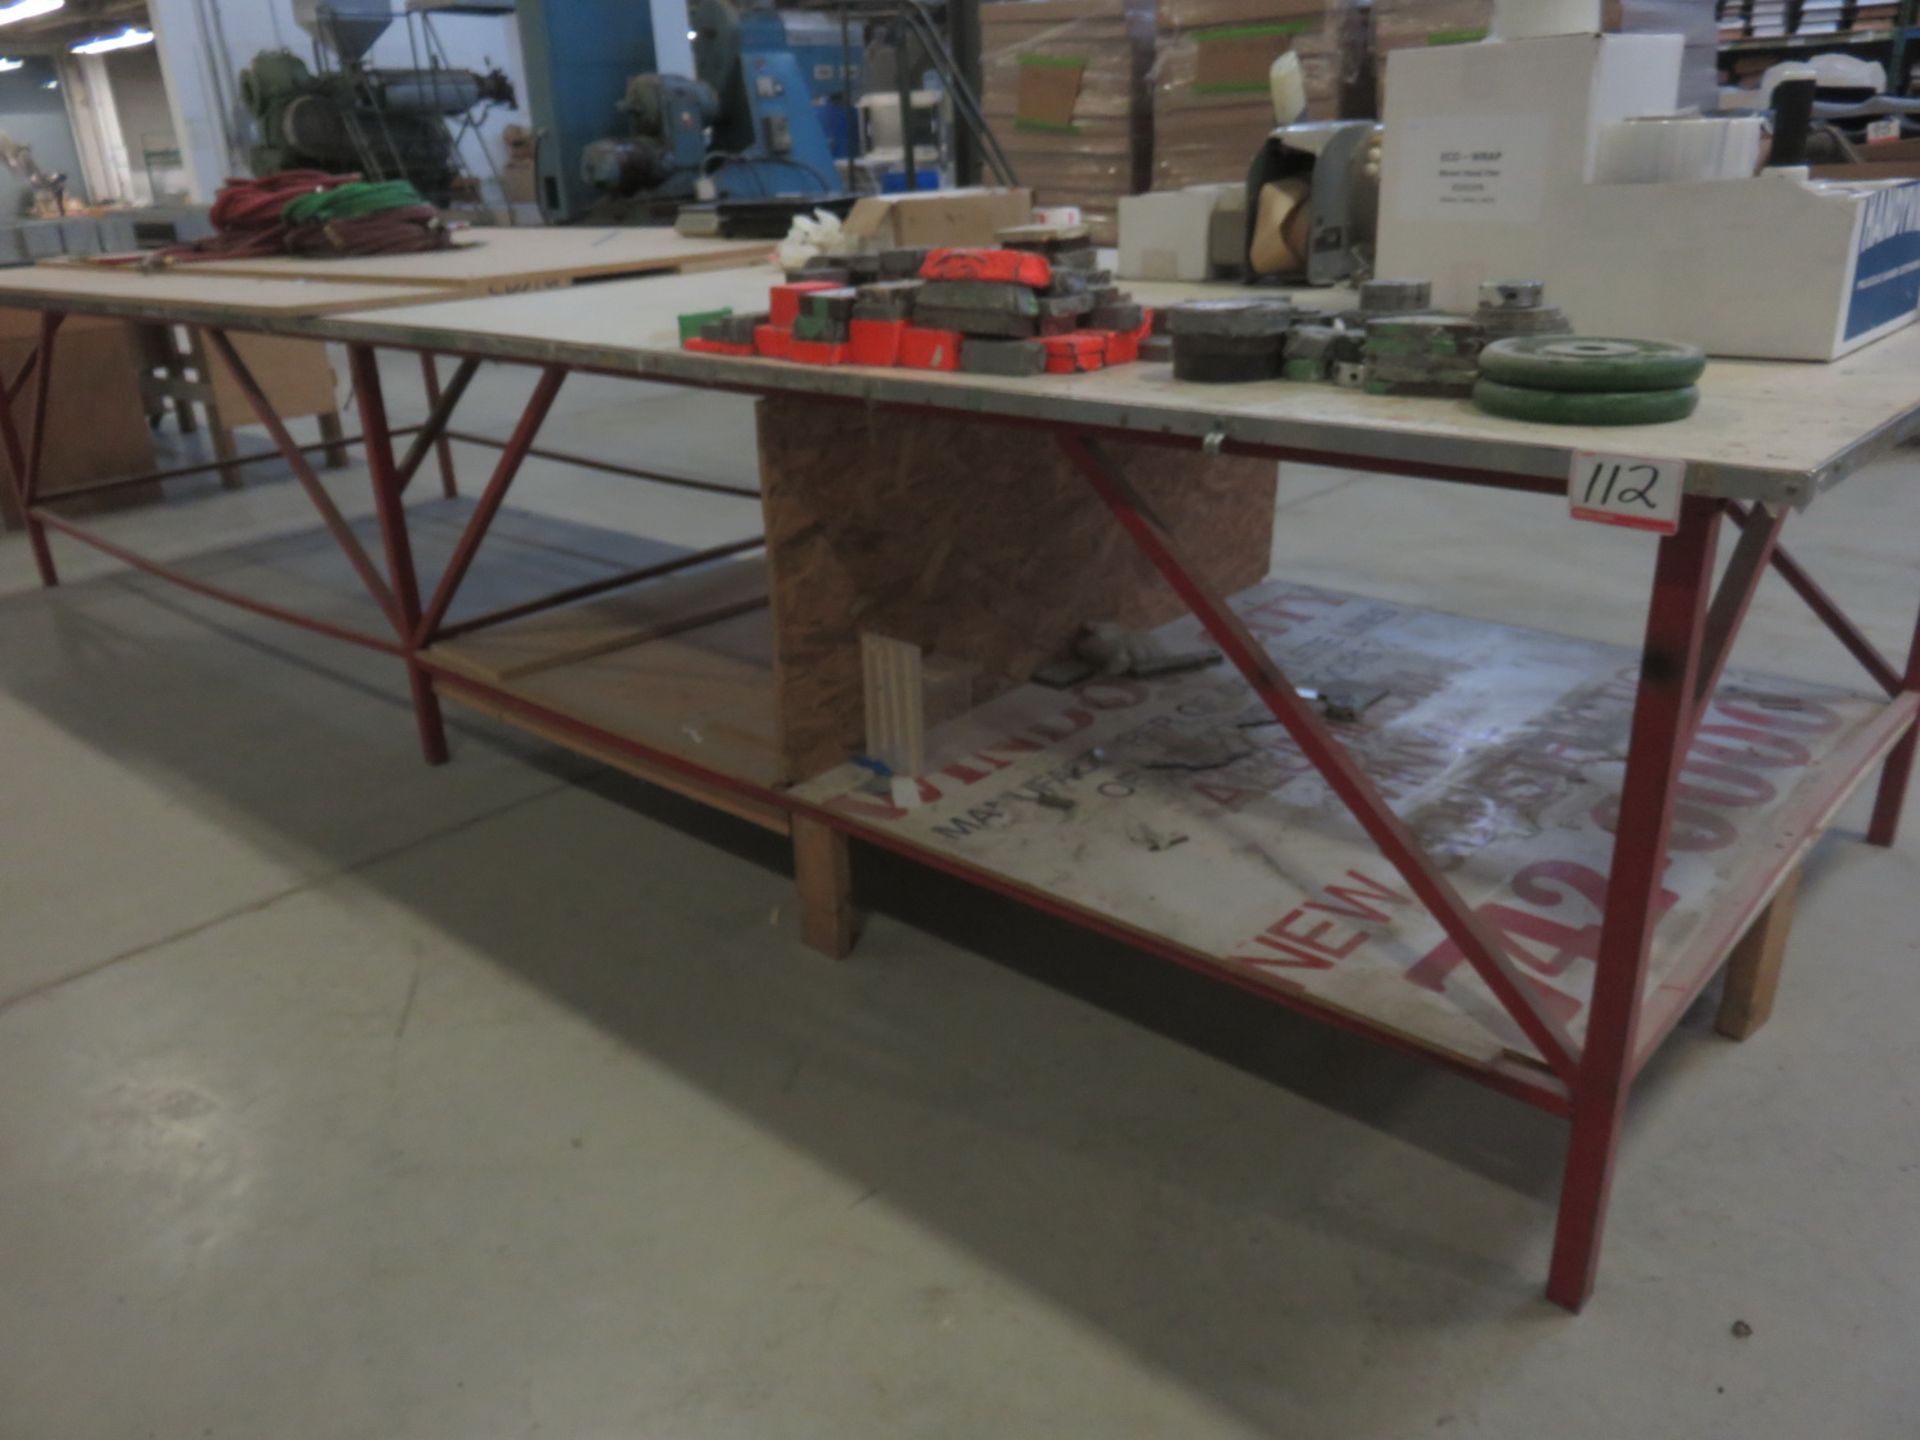 RED STEEL & WOOD 60" X 16'L SHOP TABLE